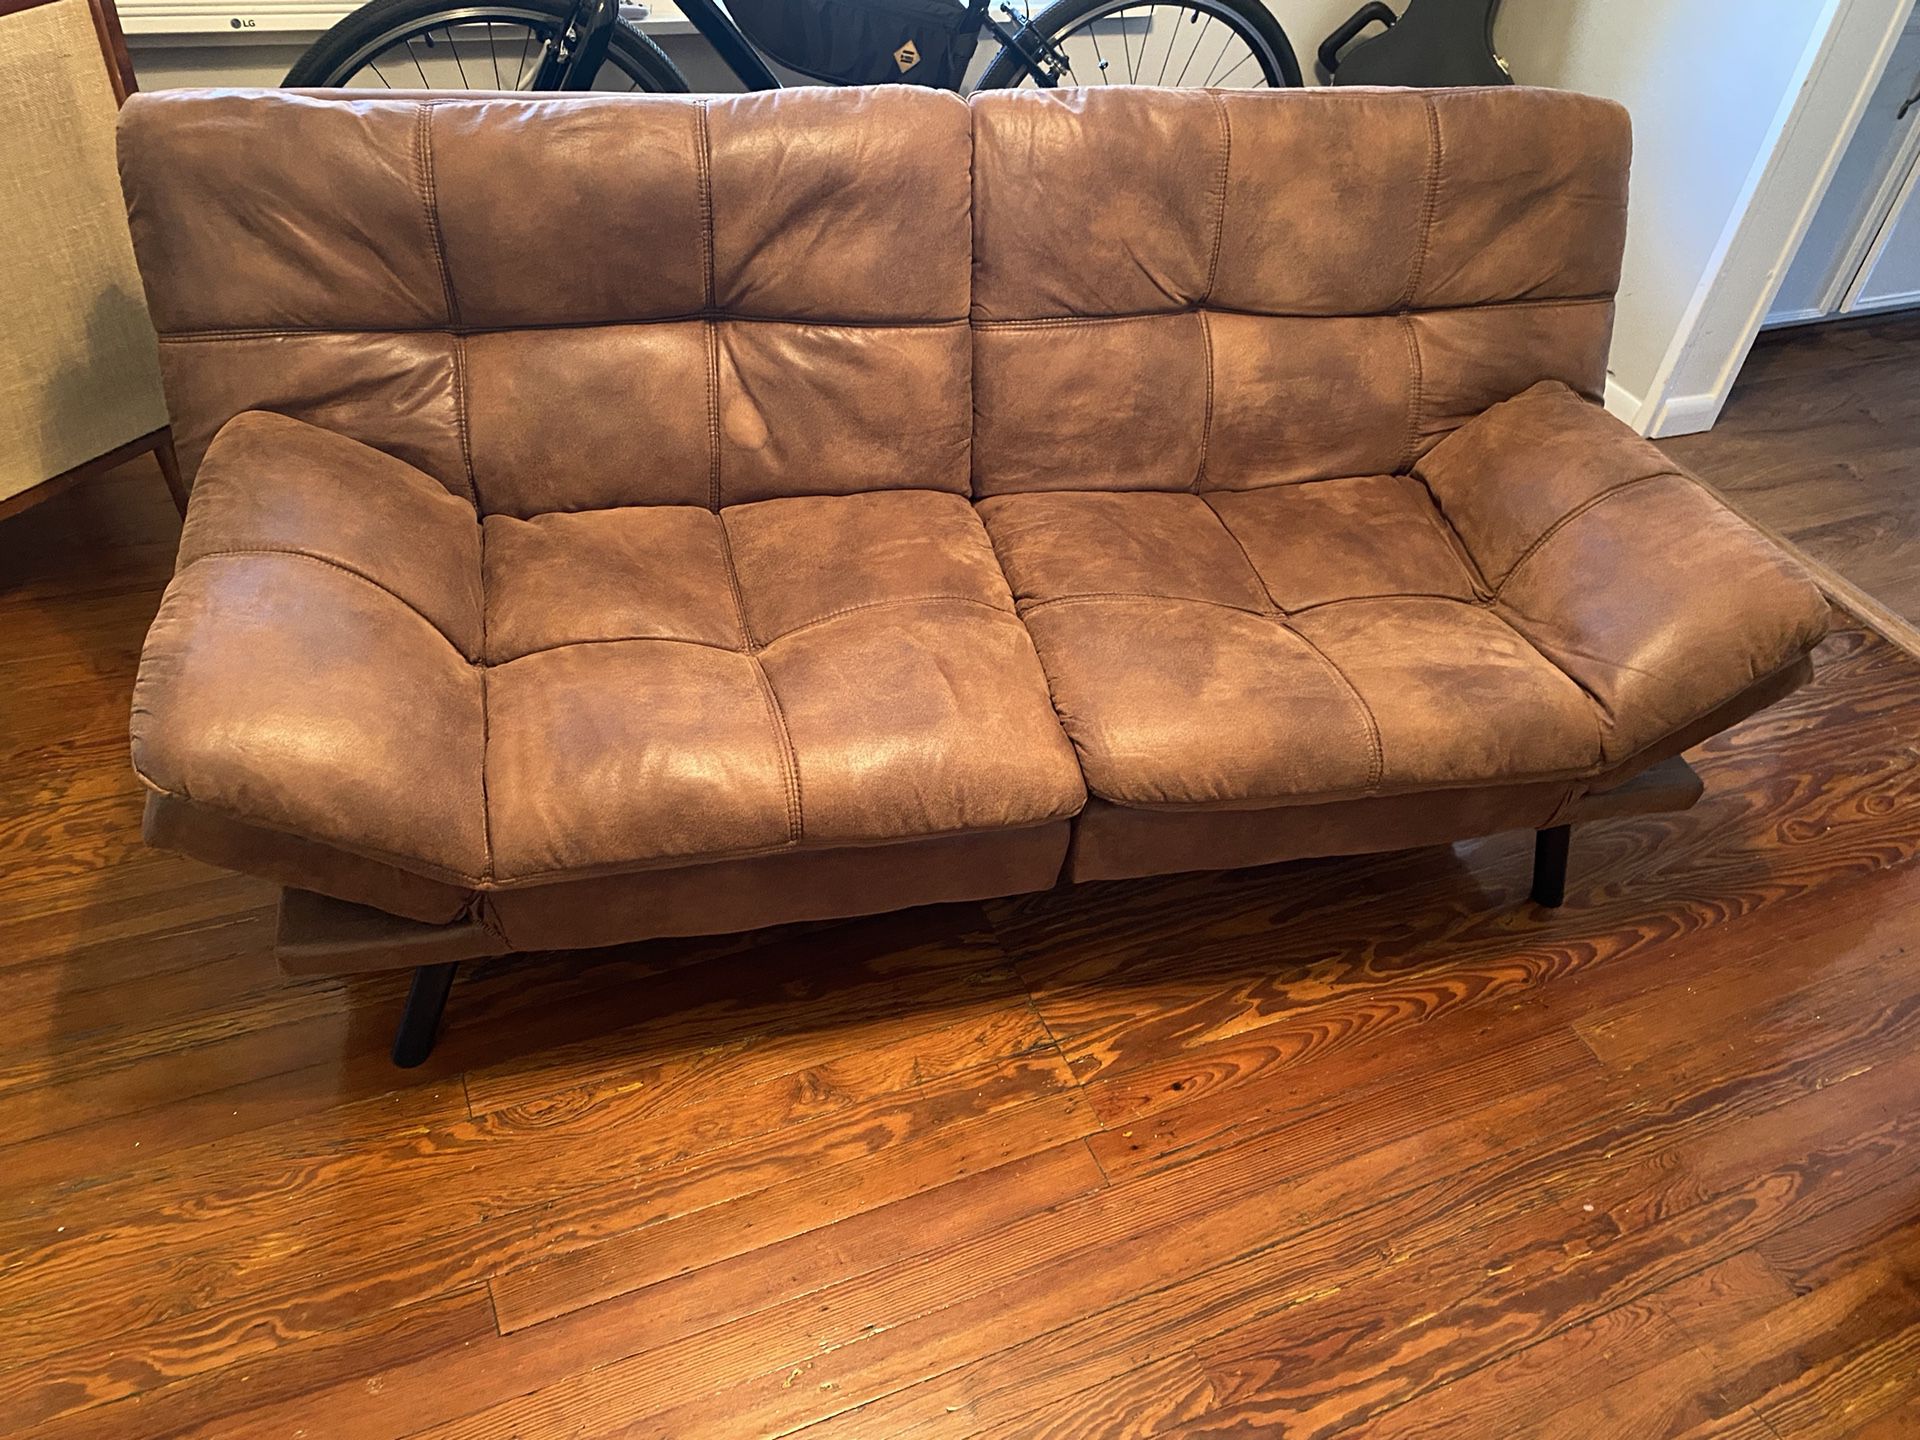 Wayfair Full 70.5" Faux Leather Split Back Convertible Sofa brown faux leather  